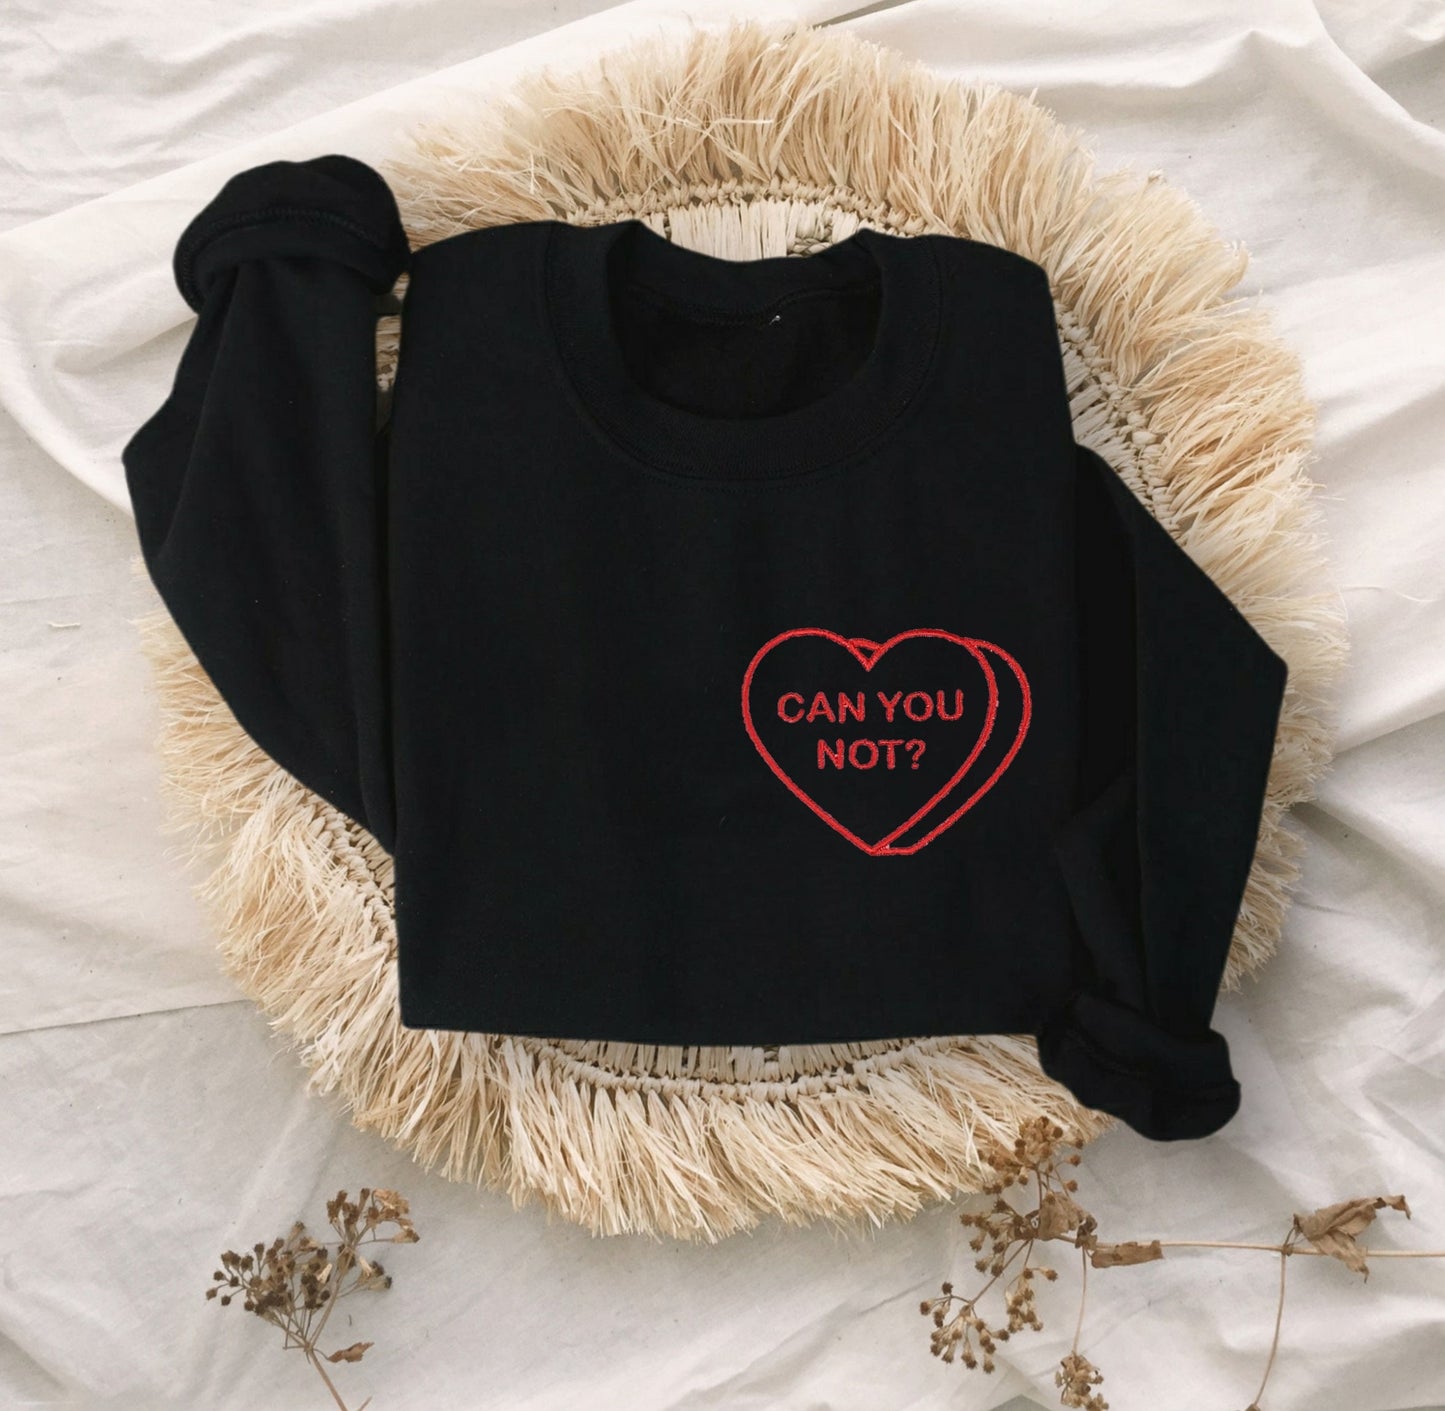 Can You Not? Embroidered Unisex Crewneck Sweatshirt